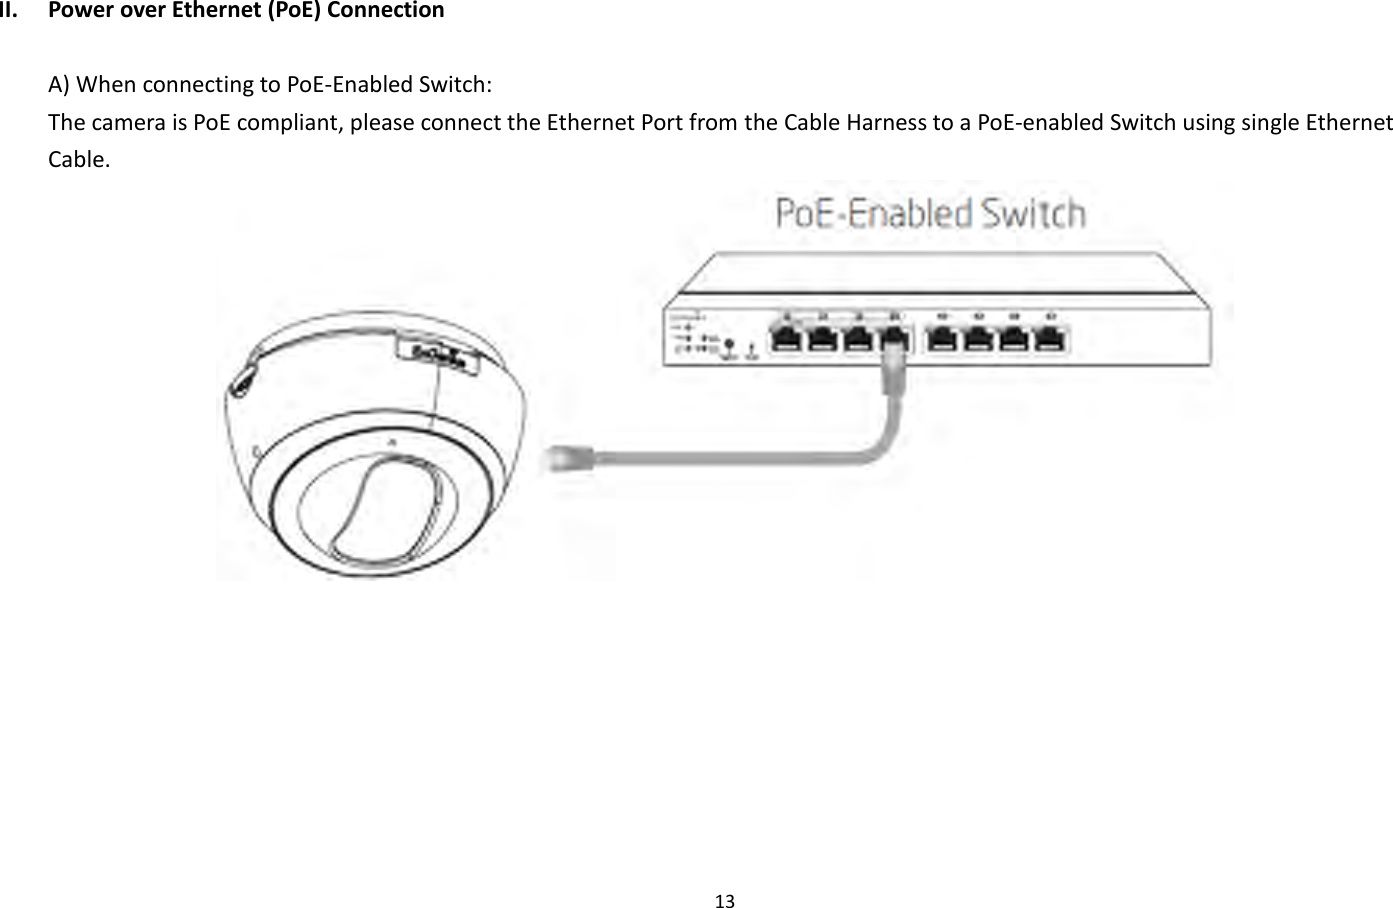 13  II. Power over Ethernet (PoE) Connection  A) When connecting to PoE-Enabled Switch: The camera is PoE compliant, please connect the Ethernet Port from the Cable Harness to a PoE-enabled Switch using single Ethernet Cable.  